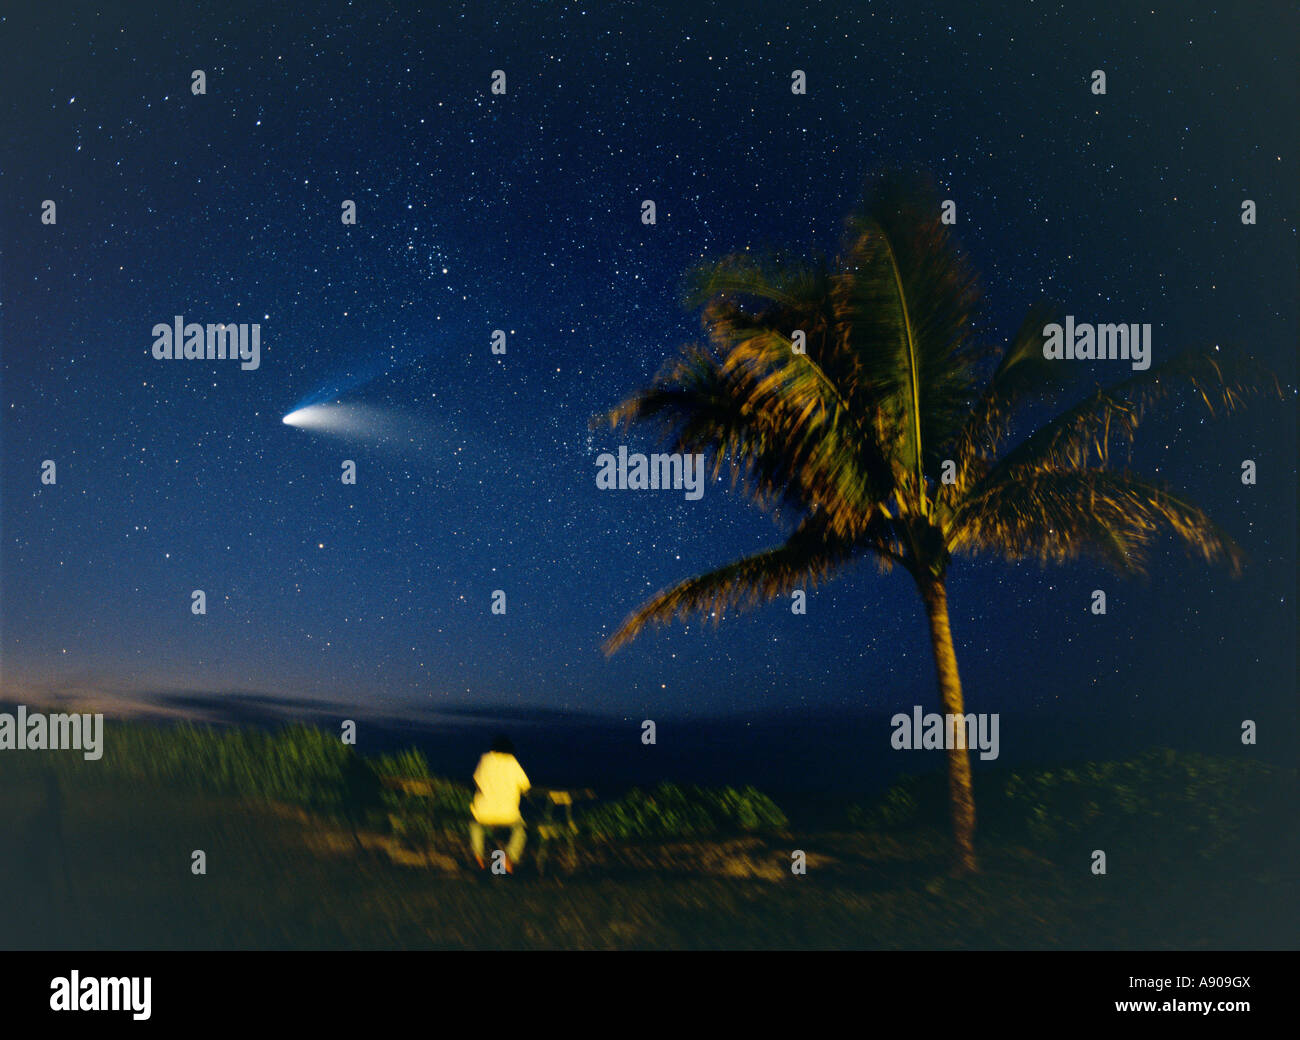 A person looking at Comet Hale-Bopp , with a palm tree in the foreground, North shore, Oahu, Hawaii Stock Photo